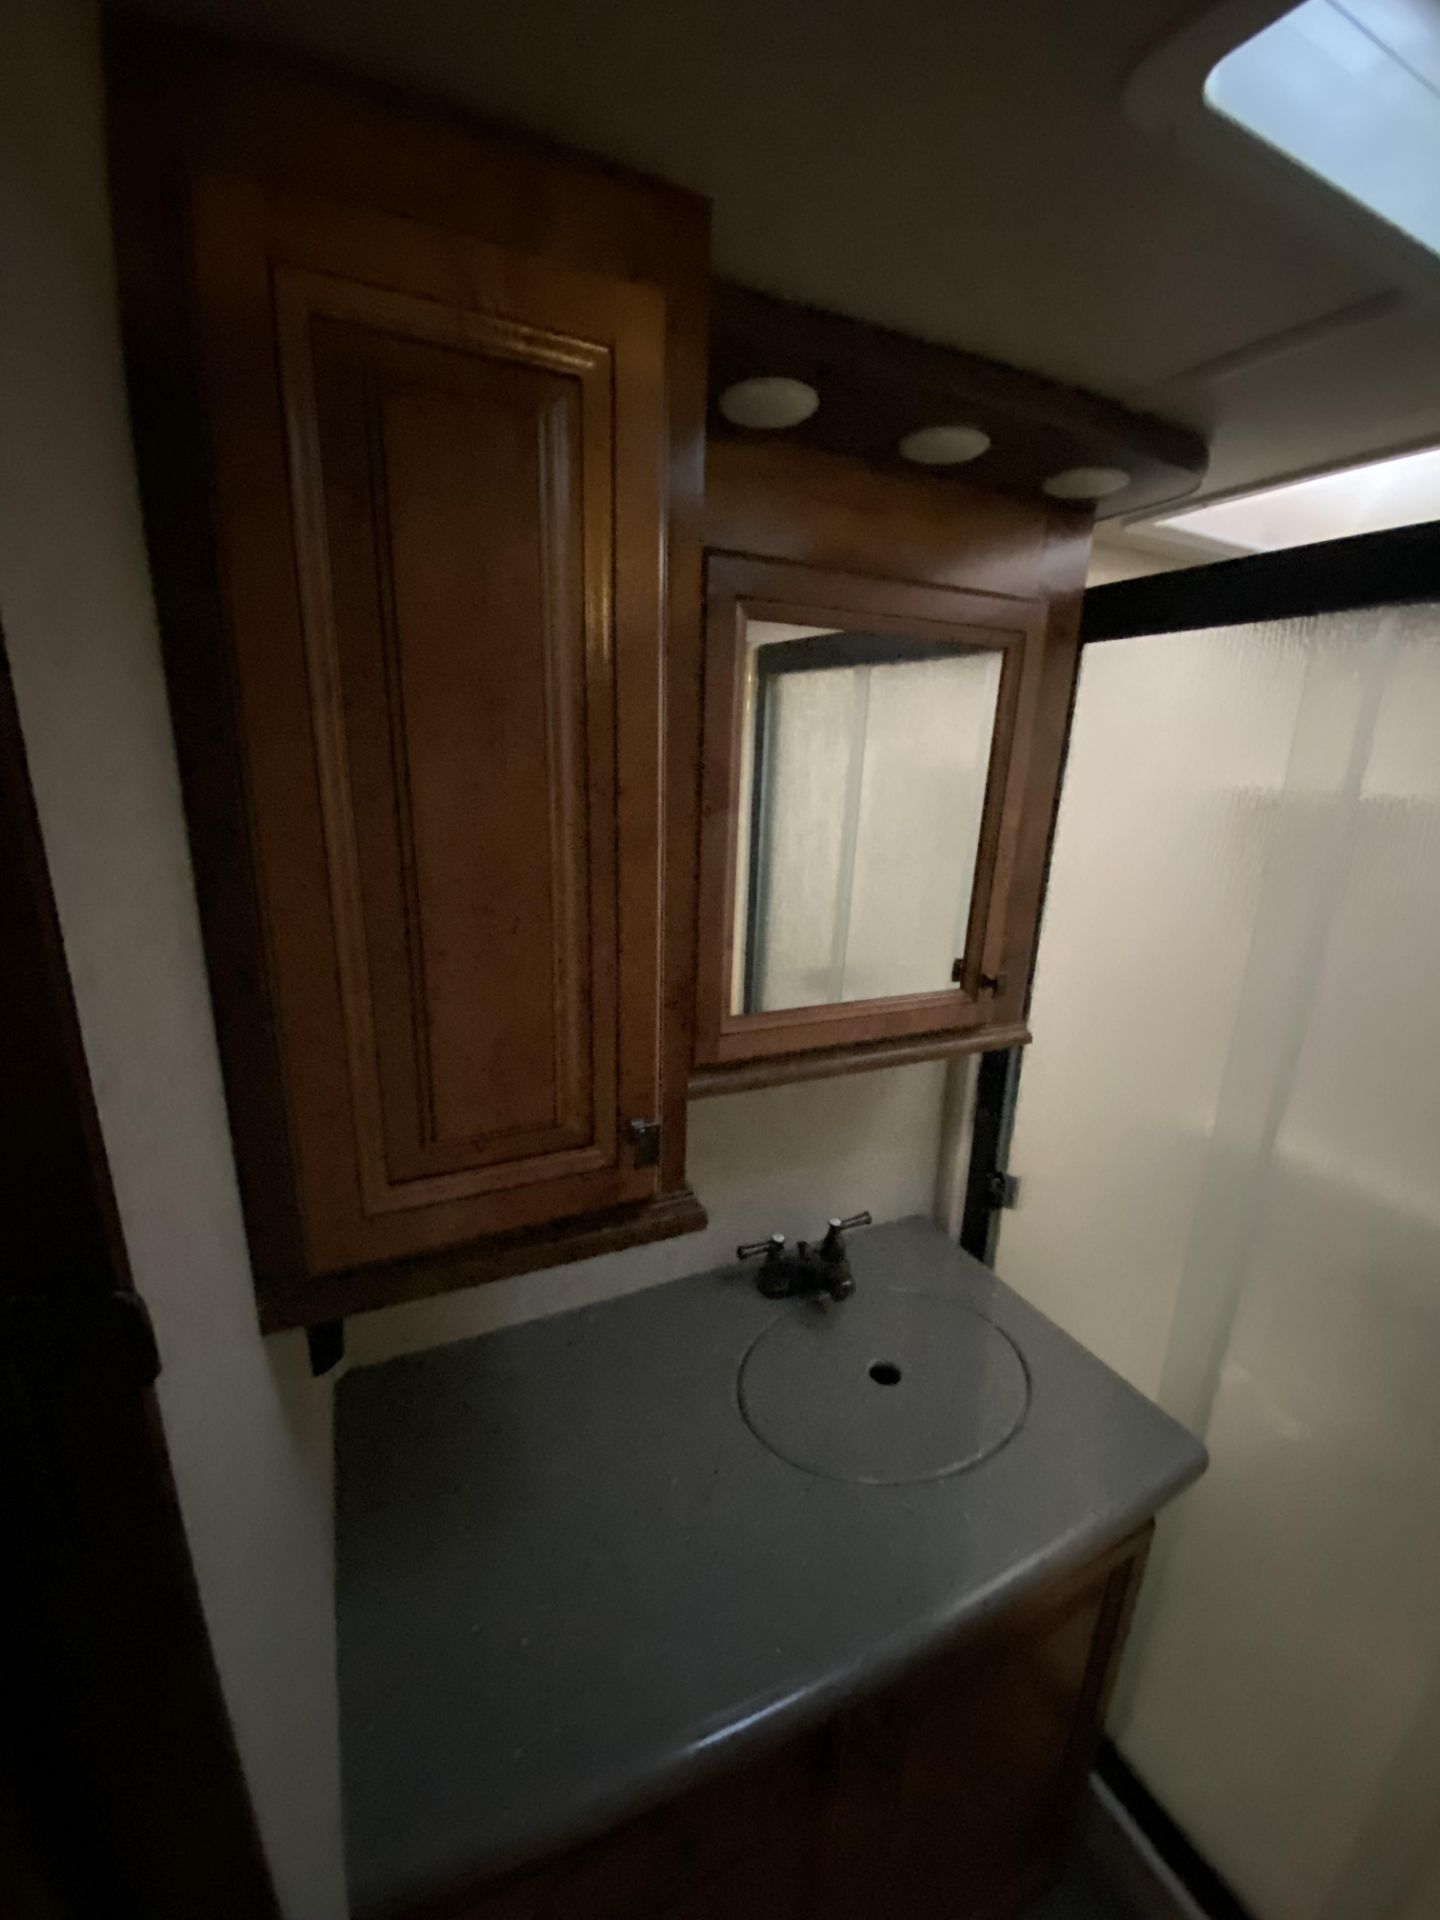 2018 Big Country 5th Wheel Camper Model 3965DSS w/4 Slide Outs - SEE VIDEO & DESCRIPTION - Image 20 of 38